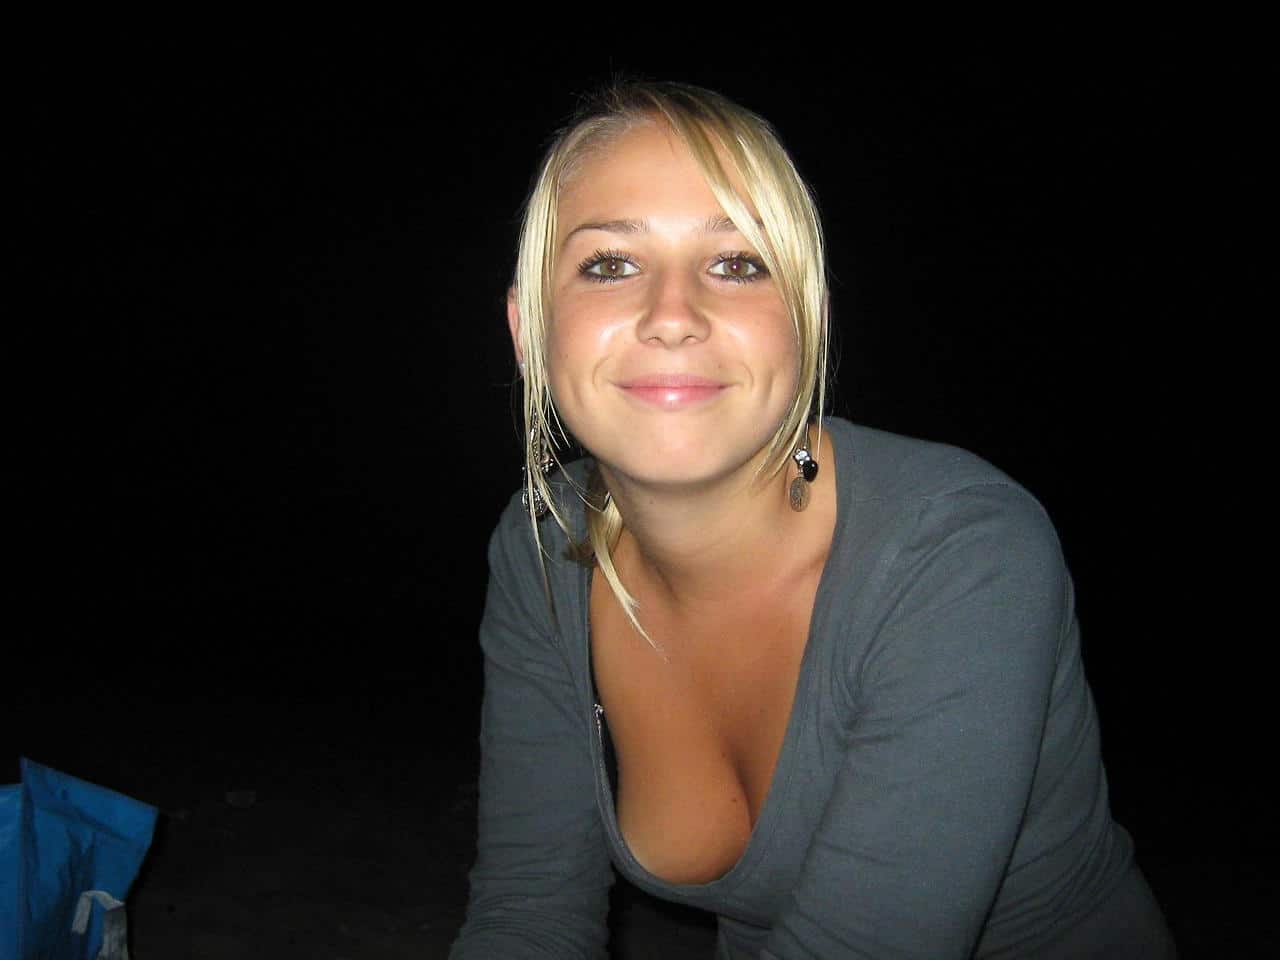 downblouse boobs flash blonde tanned blonde flashing her tits